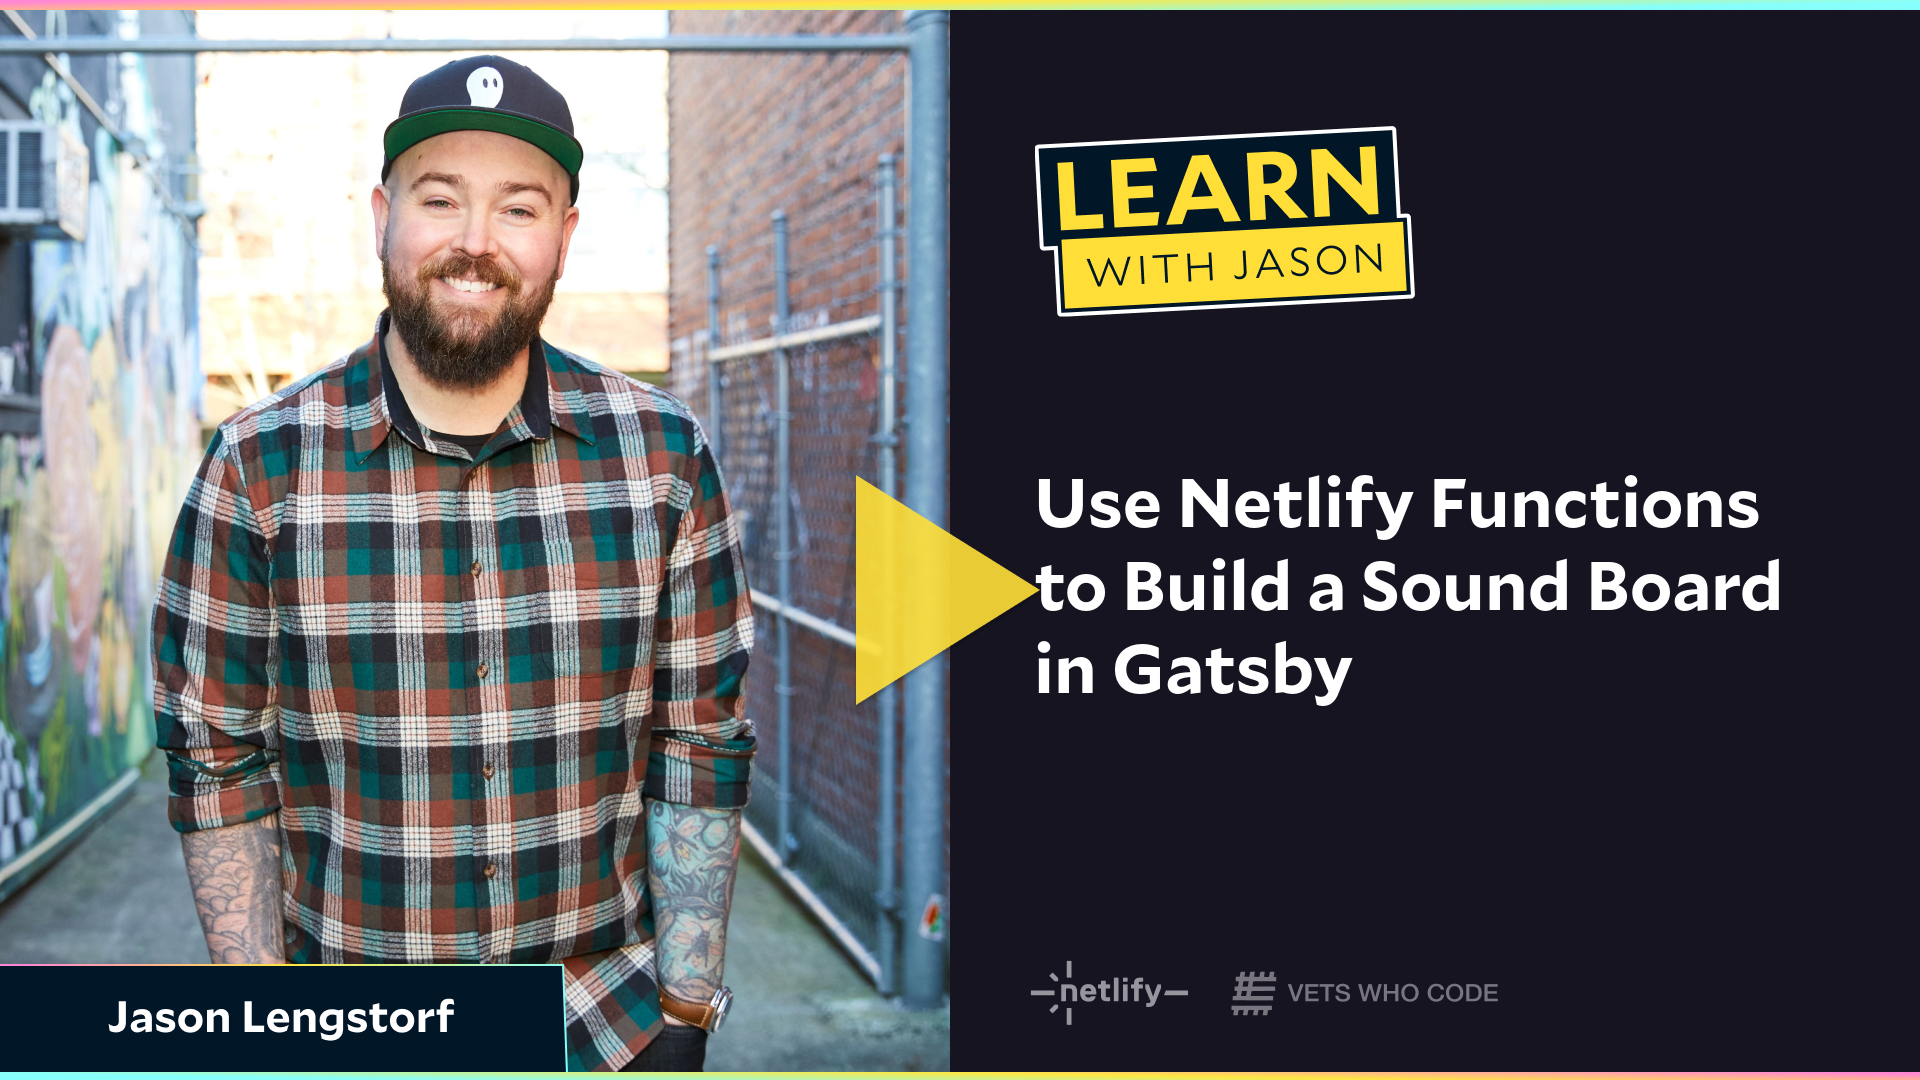 Use Netlify Functions to Build a Sound Board in Gatsby (with Jason Lengstorf)